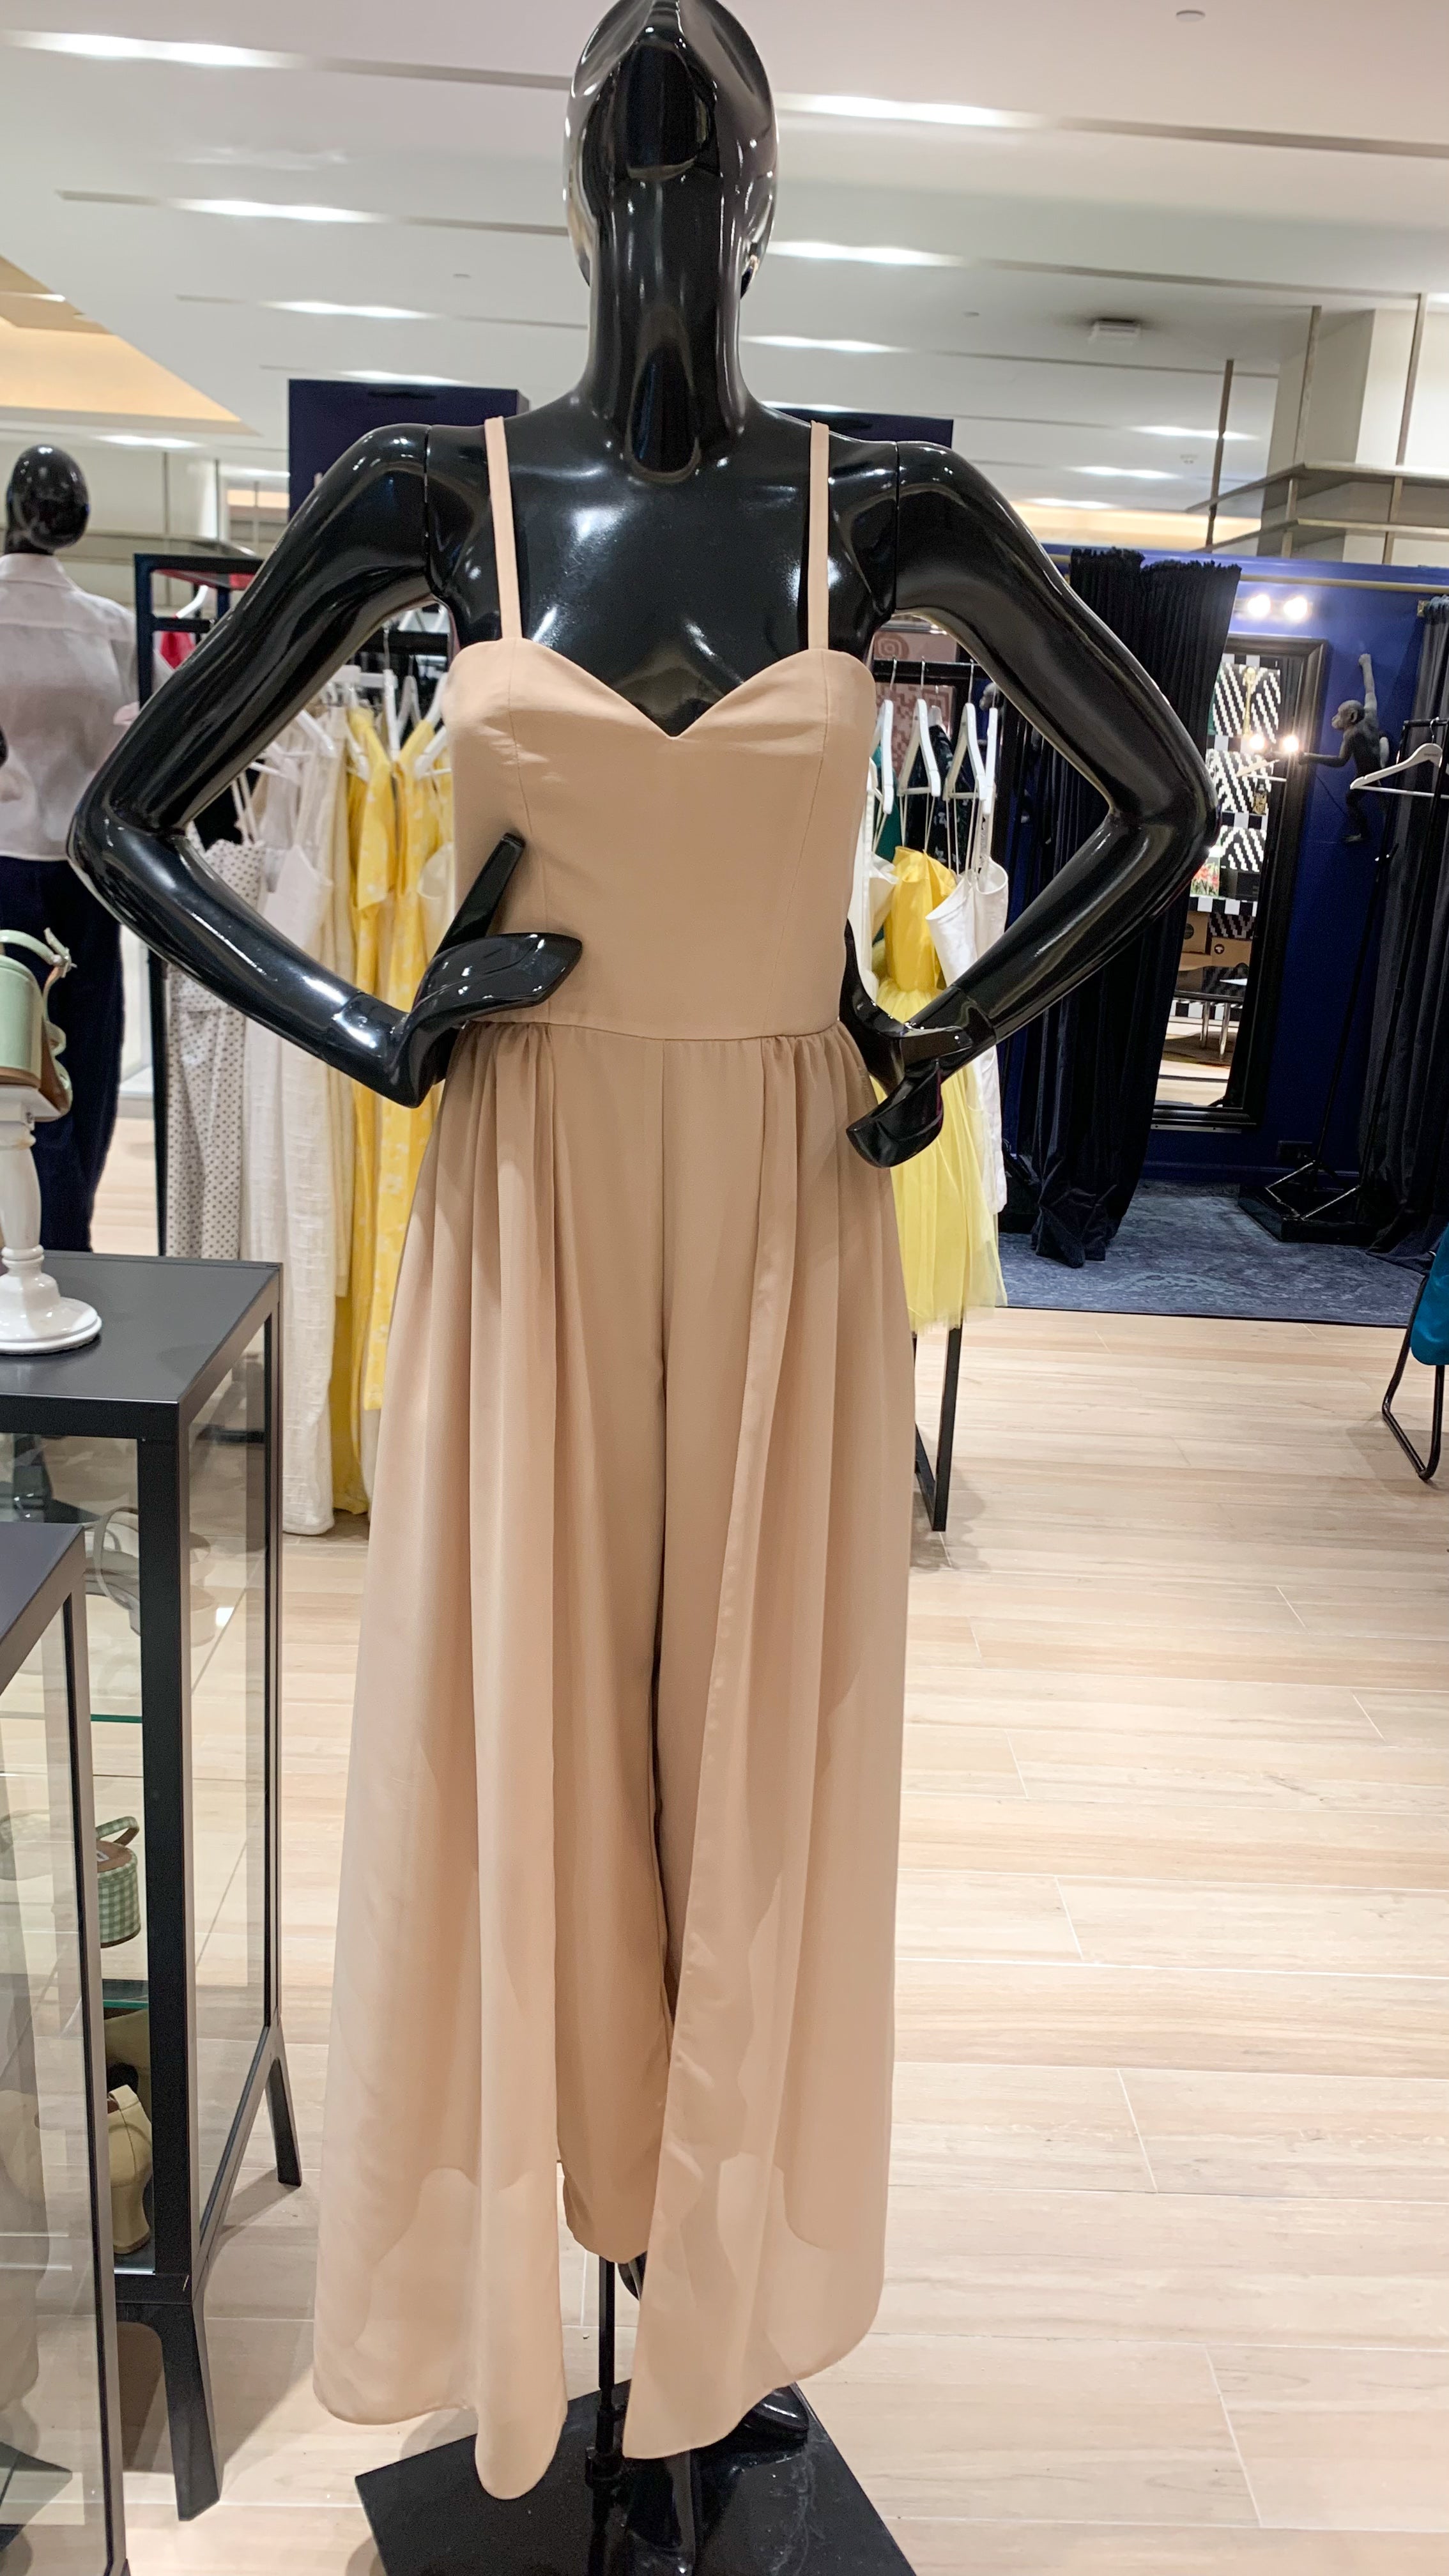 Sweetheart Baggy Jumpsuit with Overlay Skirt - Sheer Champagne